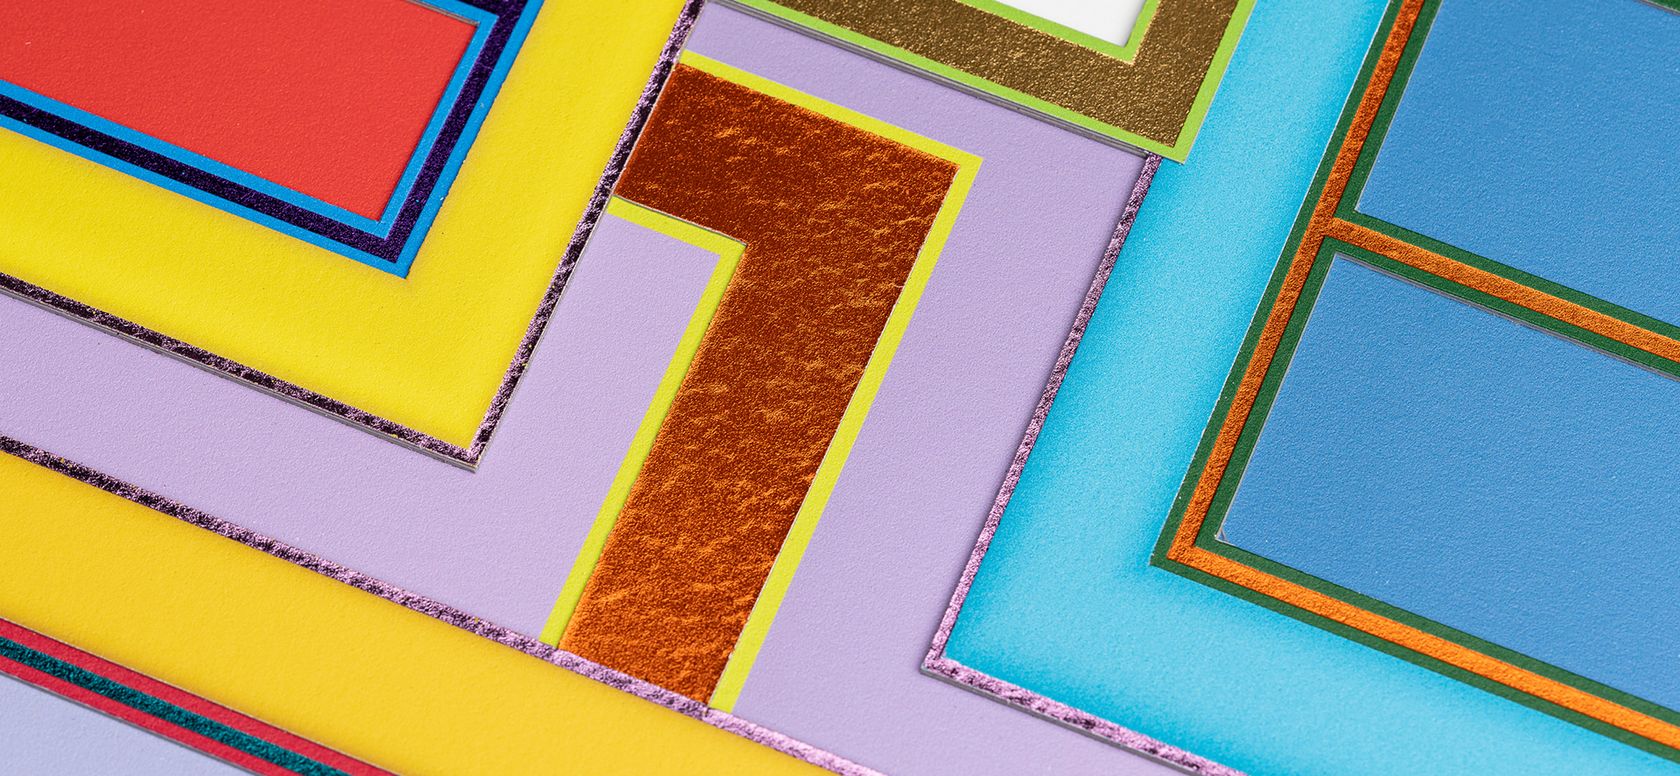 on-angle close up of a colourful, rectilinear print centred on an l-shaped section of metallic orange